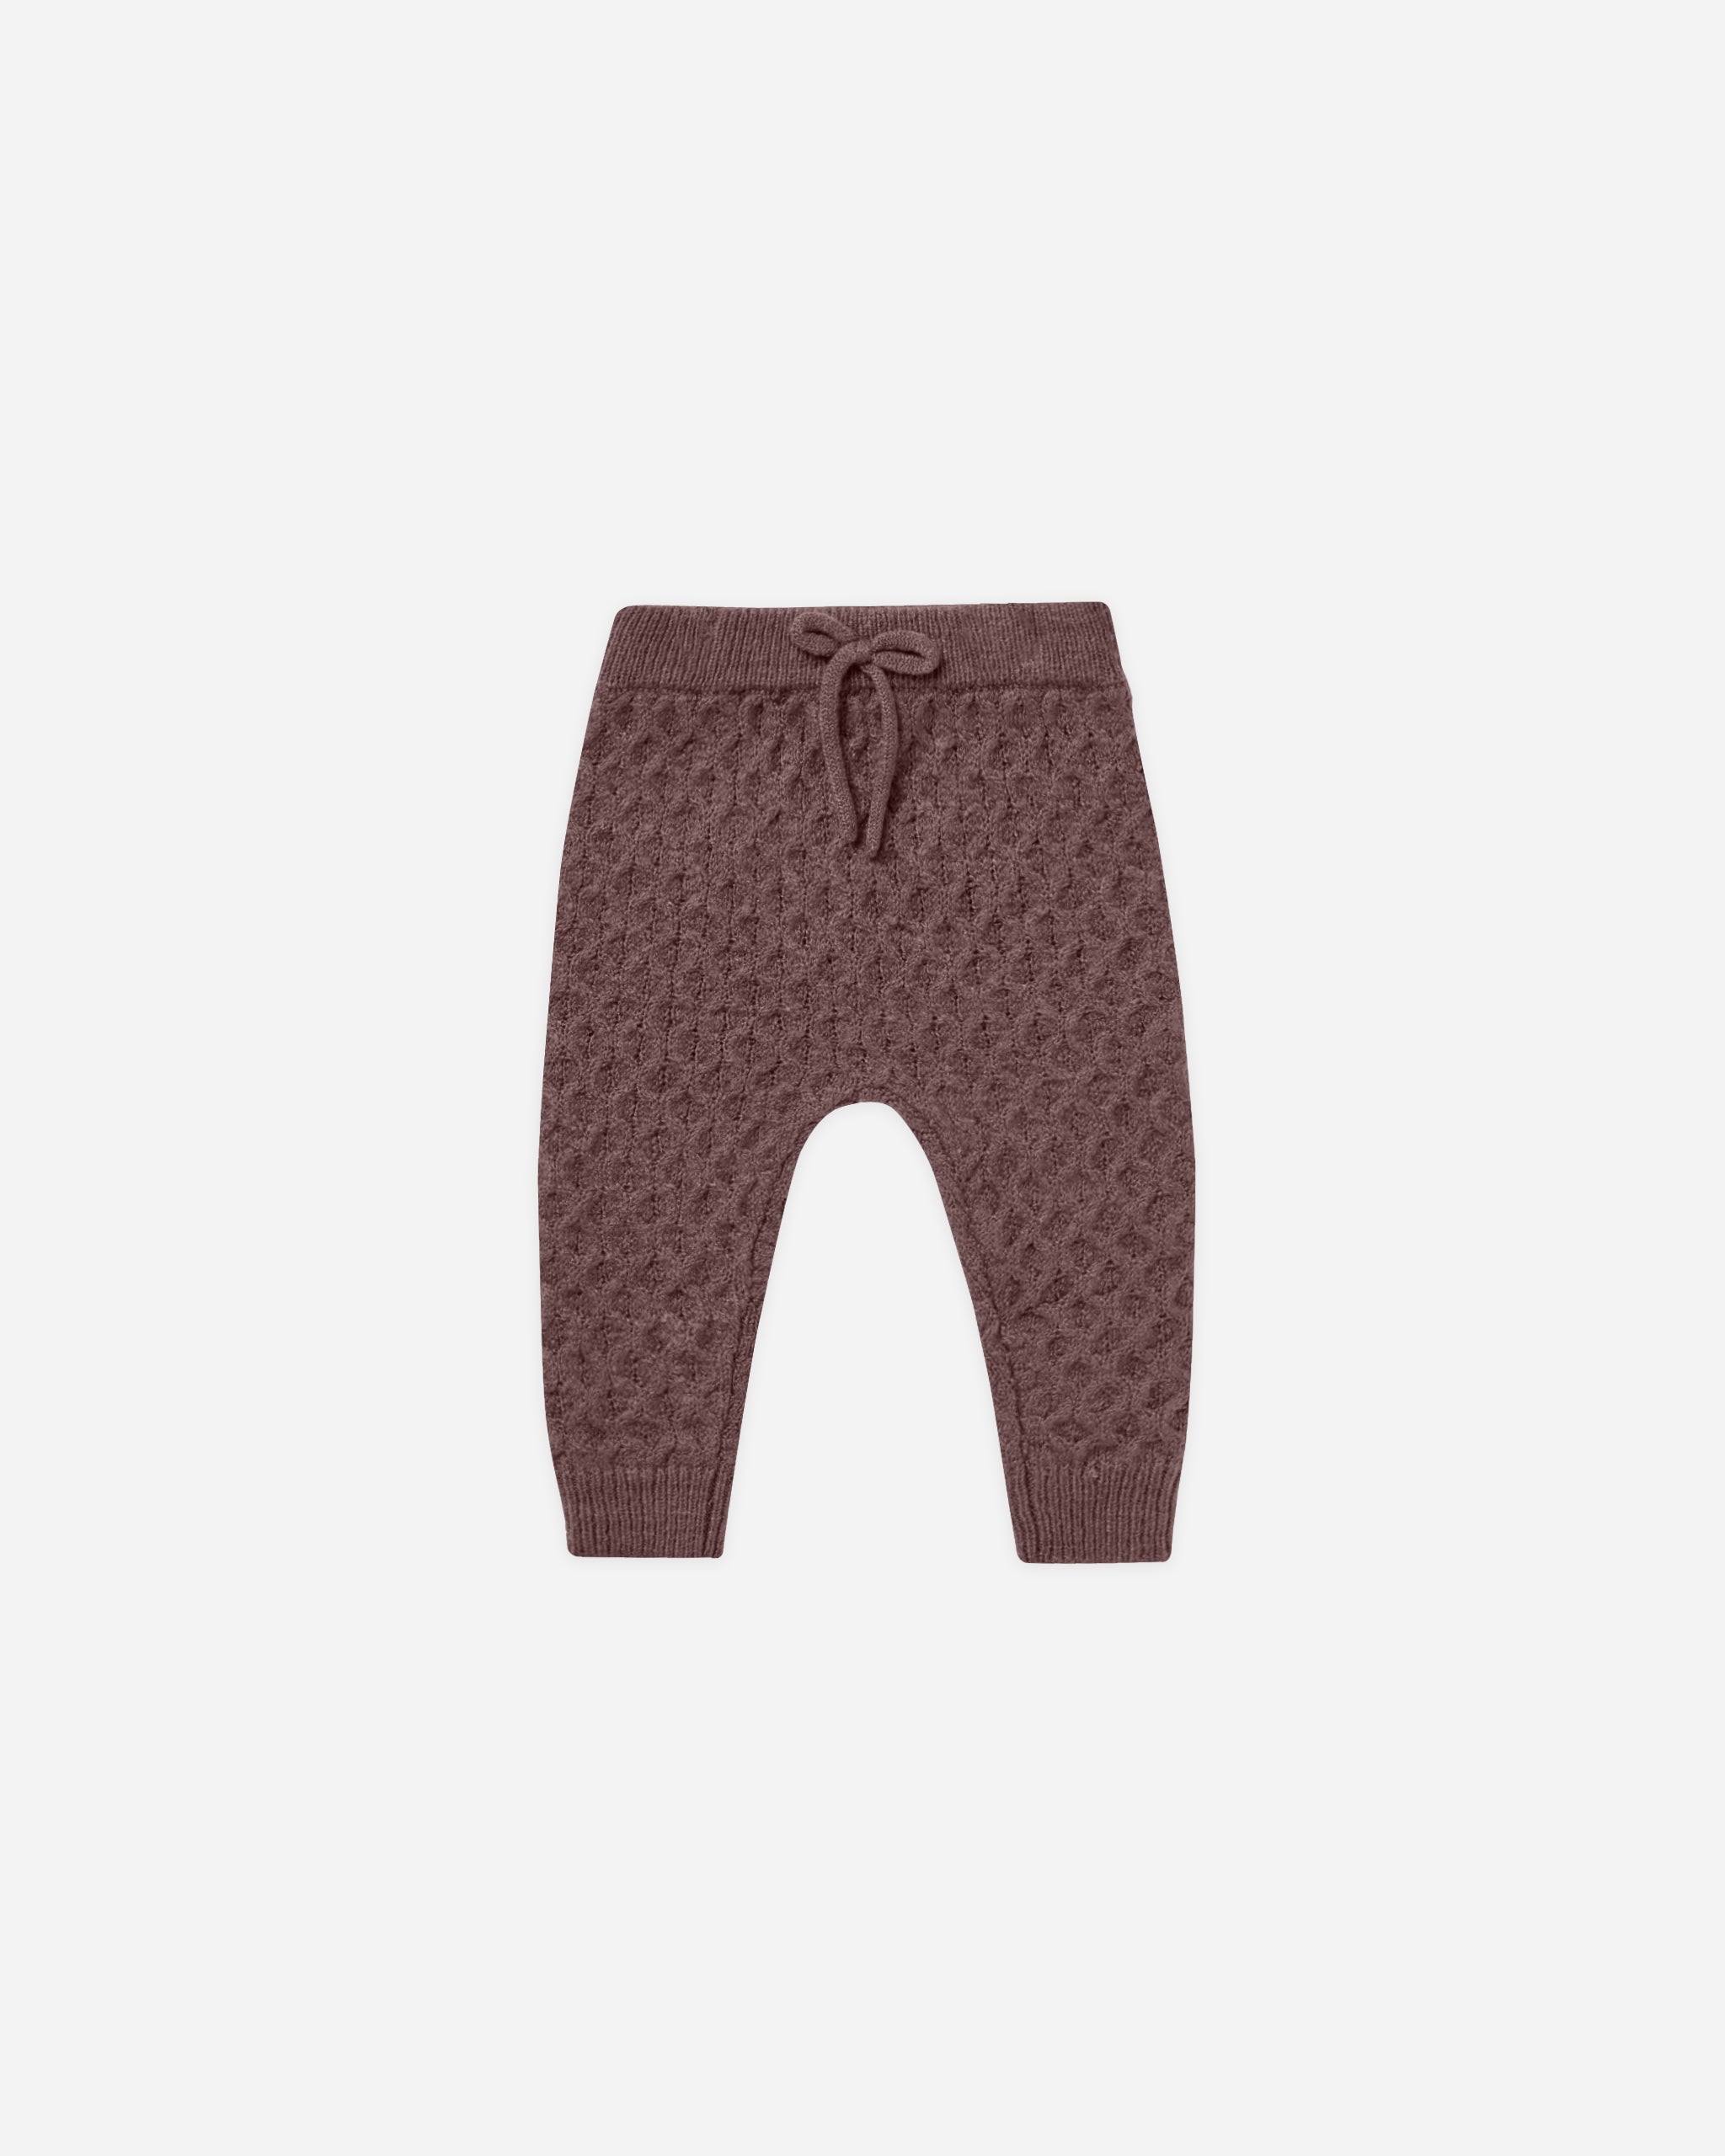 Gable Pant || Plum - Rylee + Cru | Kids Clothes | Trendy Baby Clothes | Modern Infant Outfits |